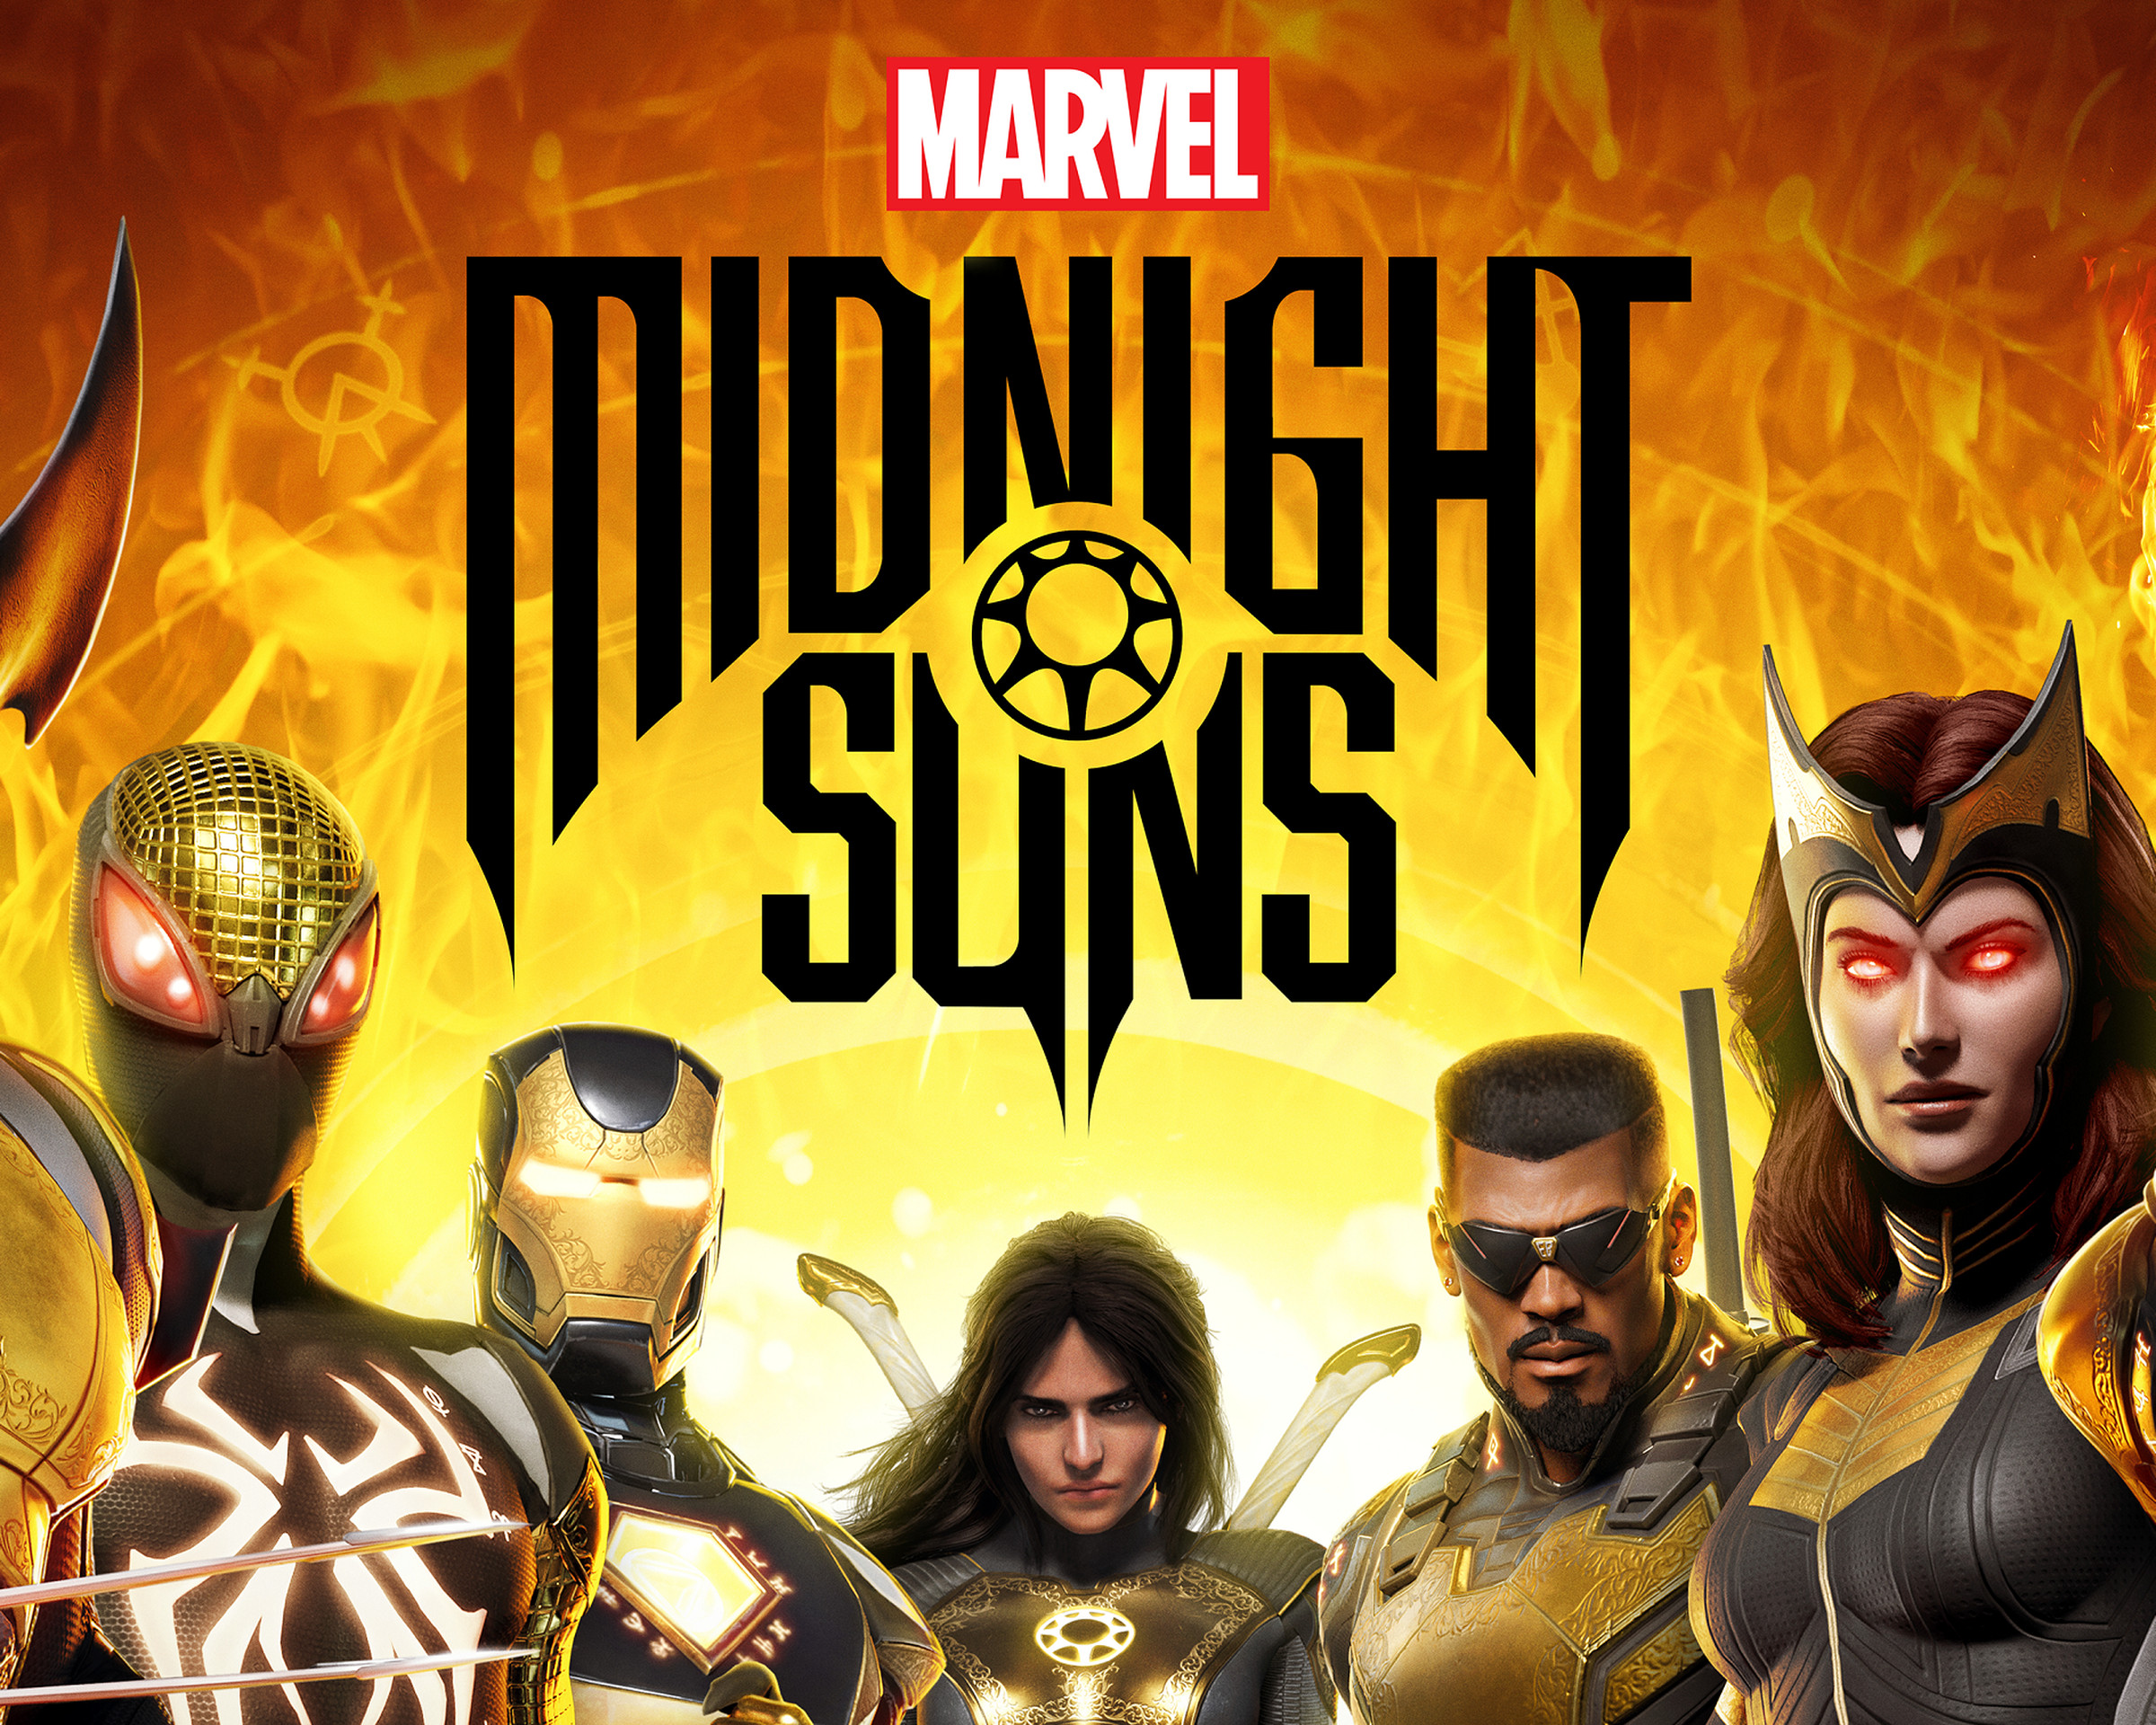 Key art from Marvel’s Midnight Suns featureing Wolverine, Spiderman, Iron Man, Blade, Scarlet Witch, and Ghost Rider flanking the player character called The Hunter in the center under the game’s logo.